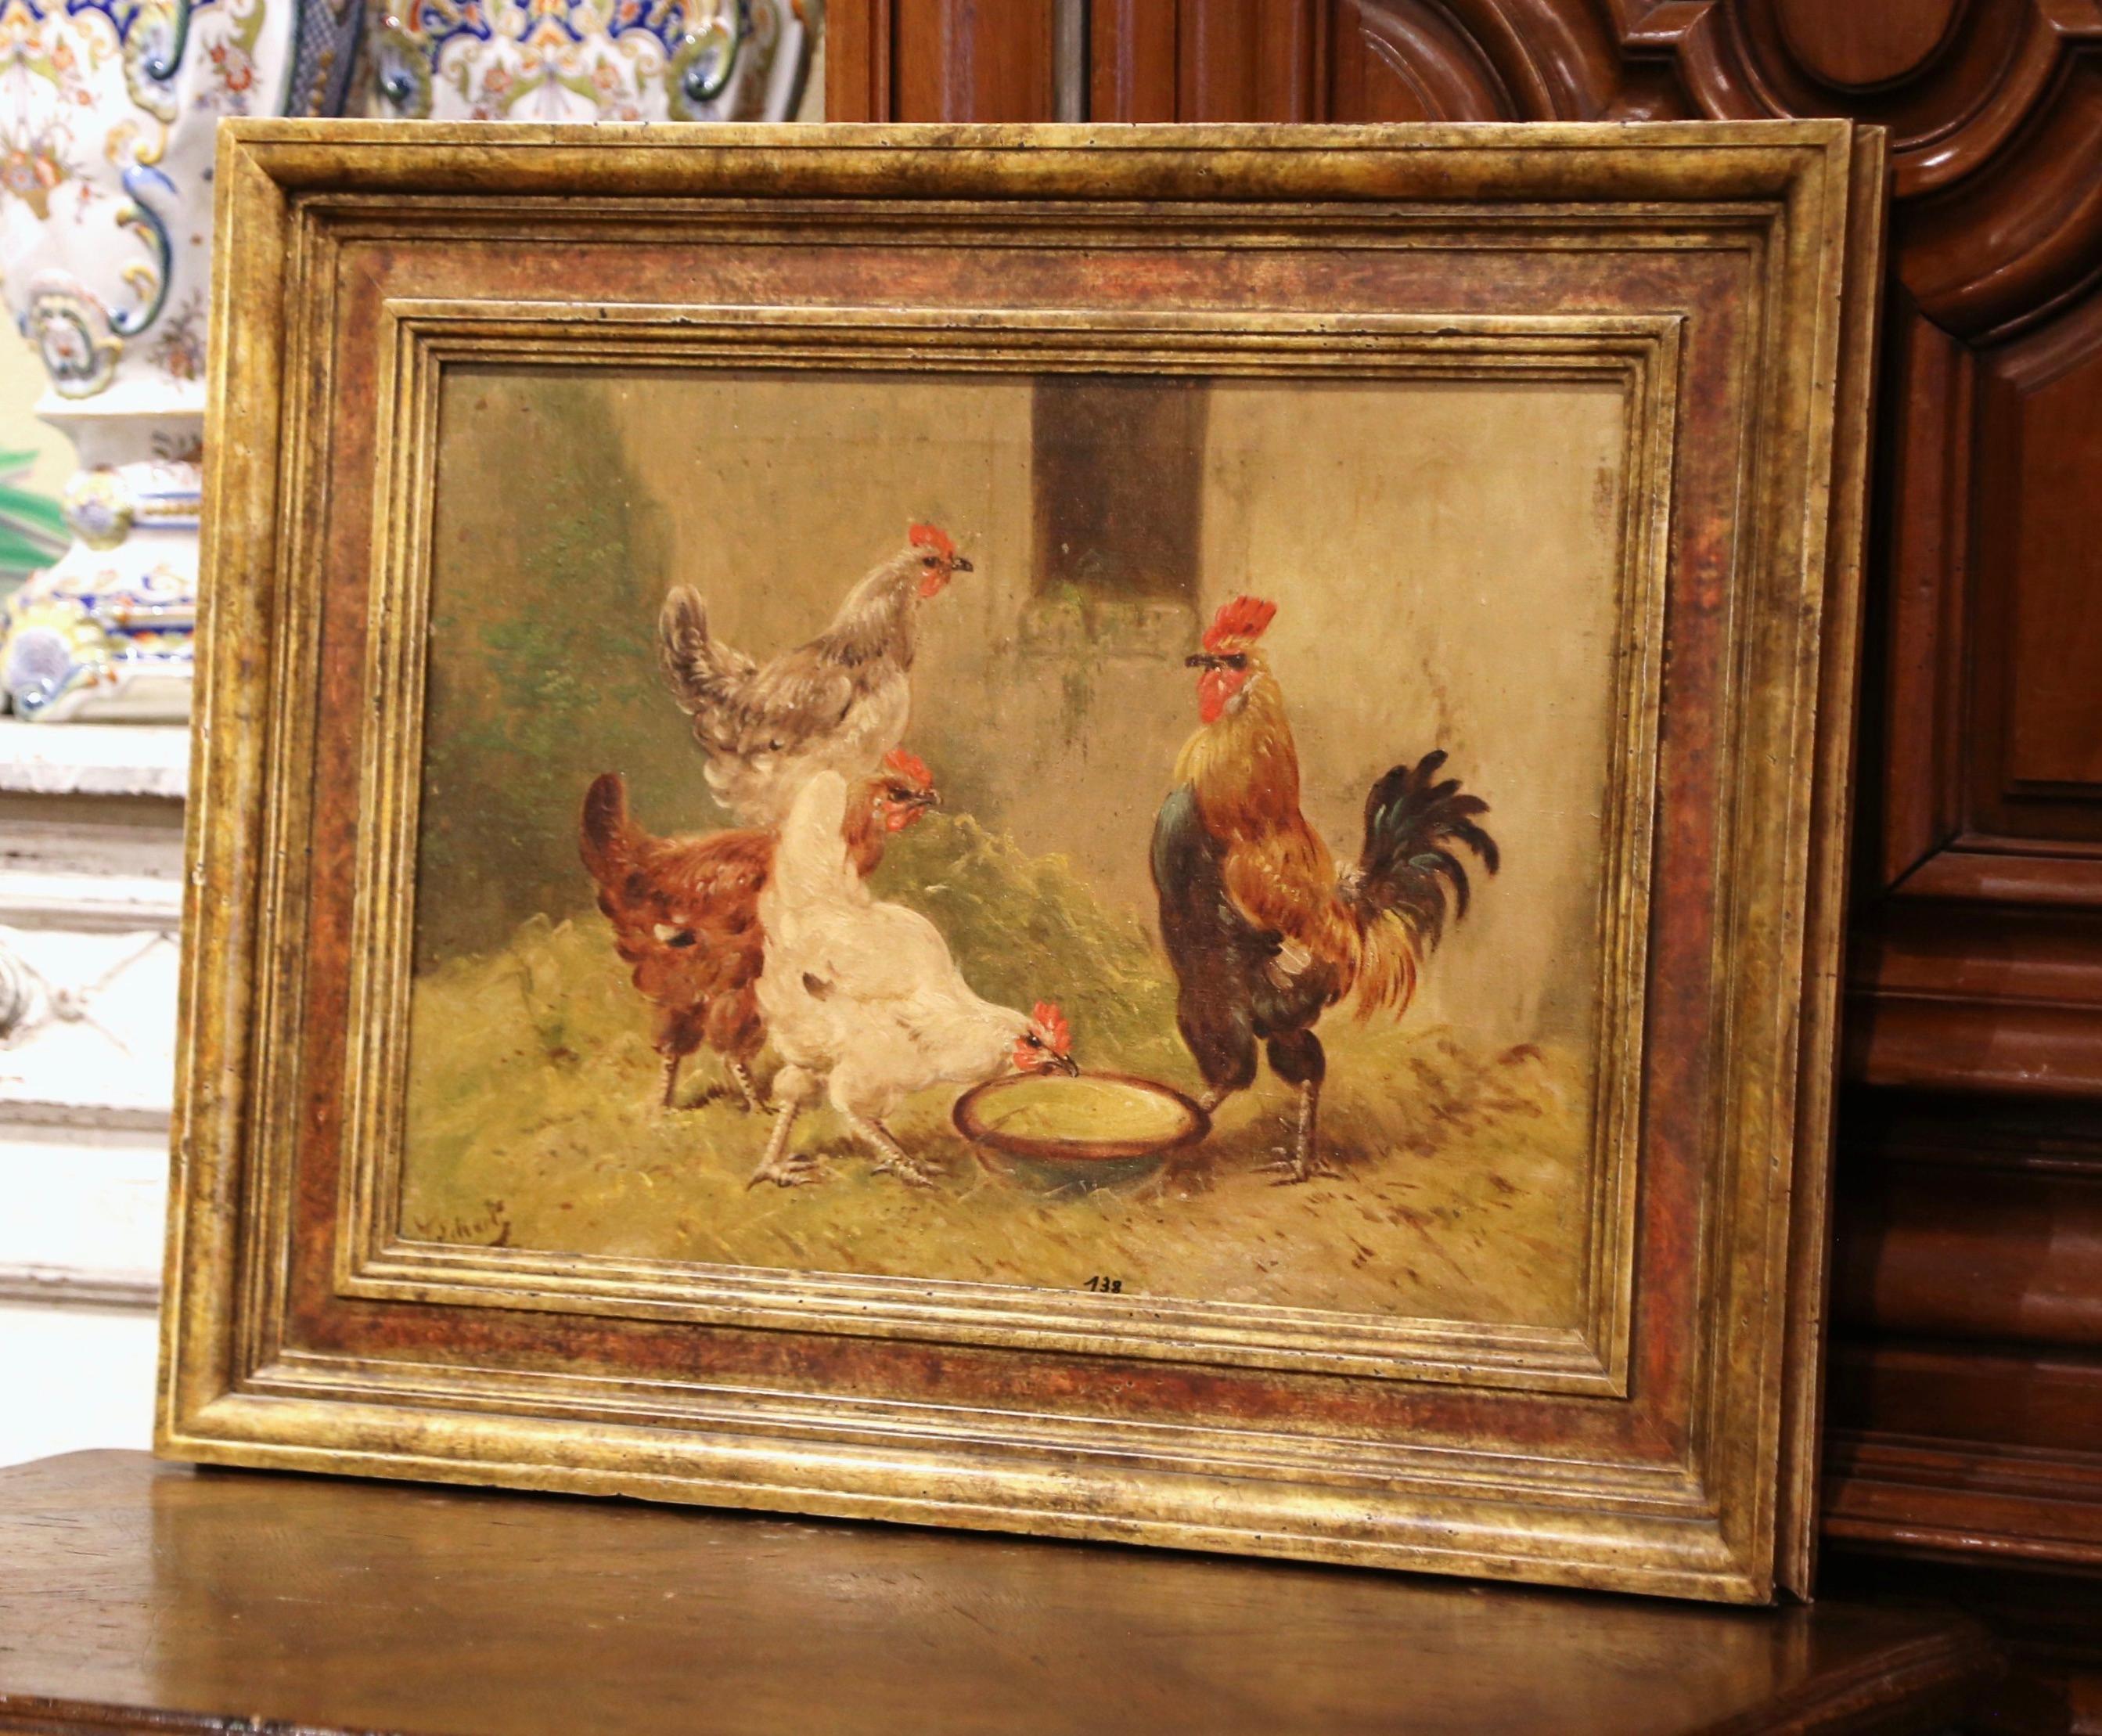 This antique oil on canvas painting was created in France, circa 1930. Set inside a carved gilt frame, the composition depicts a typical 